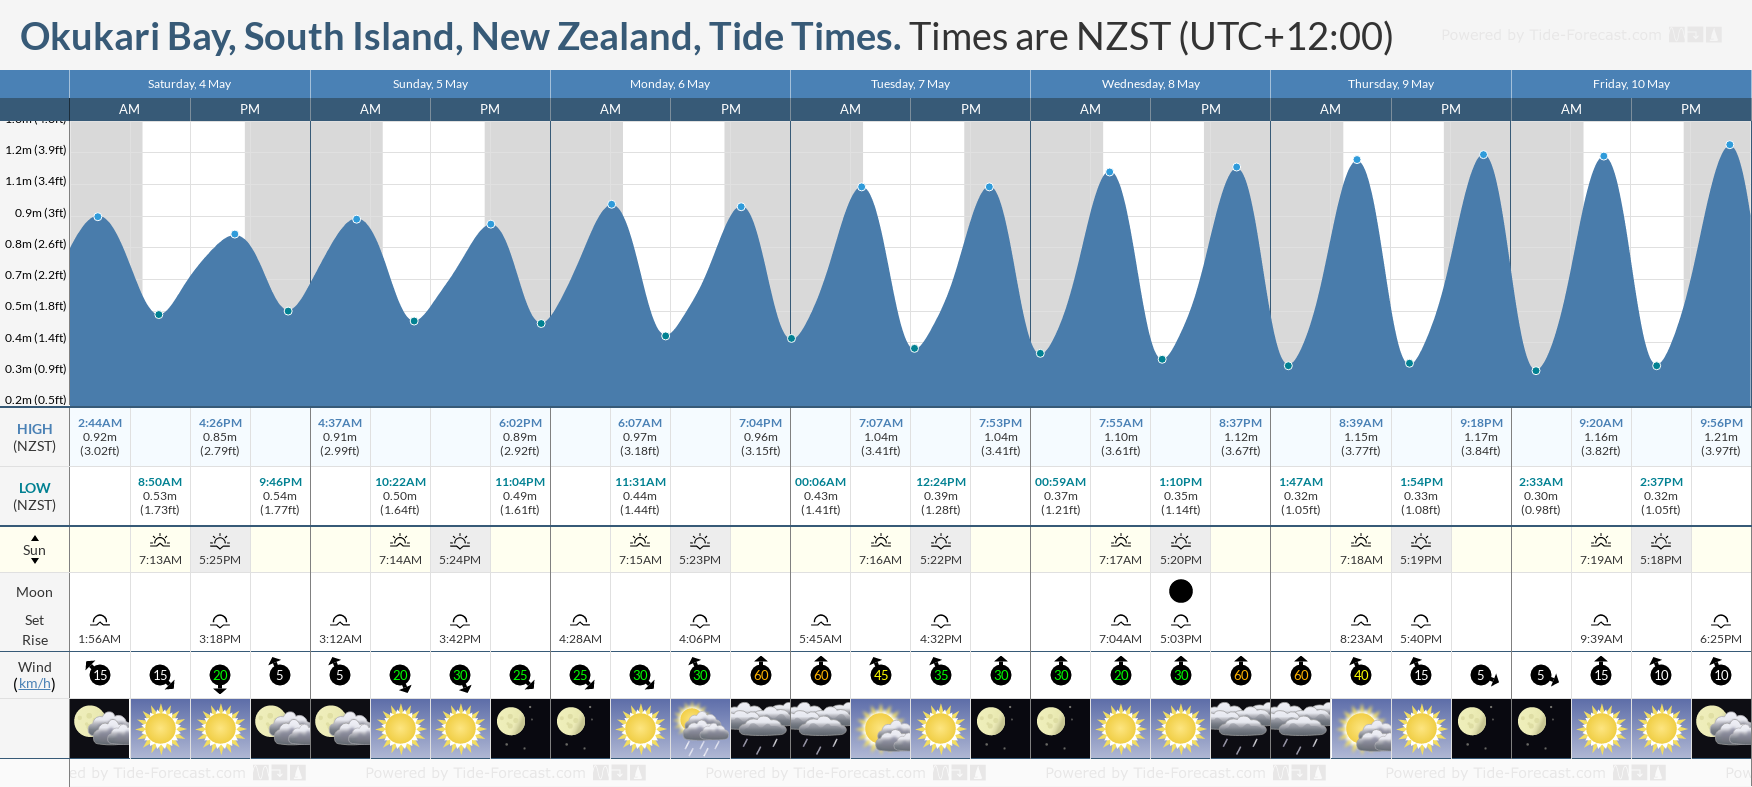 Okukari Bay, South Island, New Zealand Tide Chart including high and low tide tide times for the next 7 days